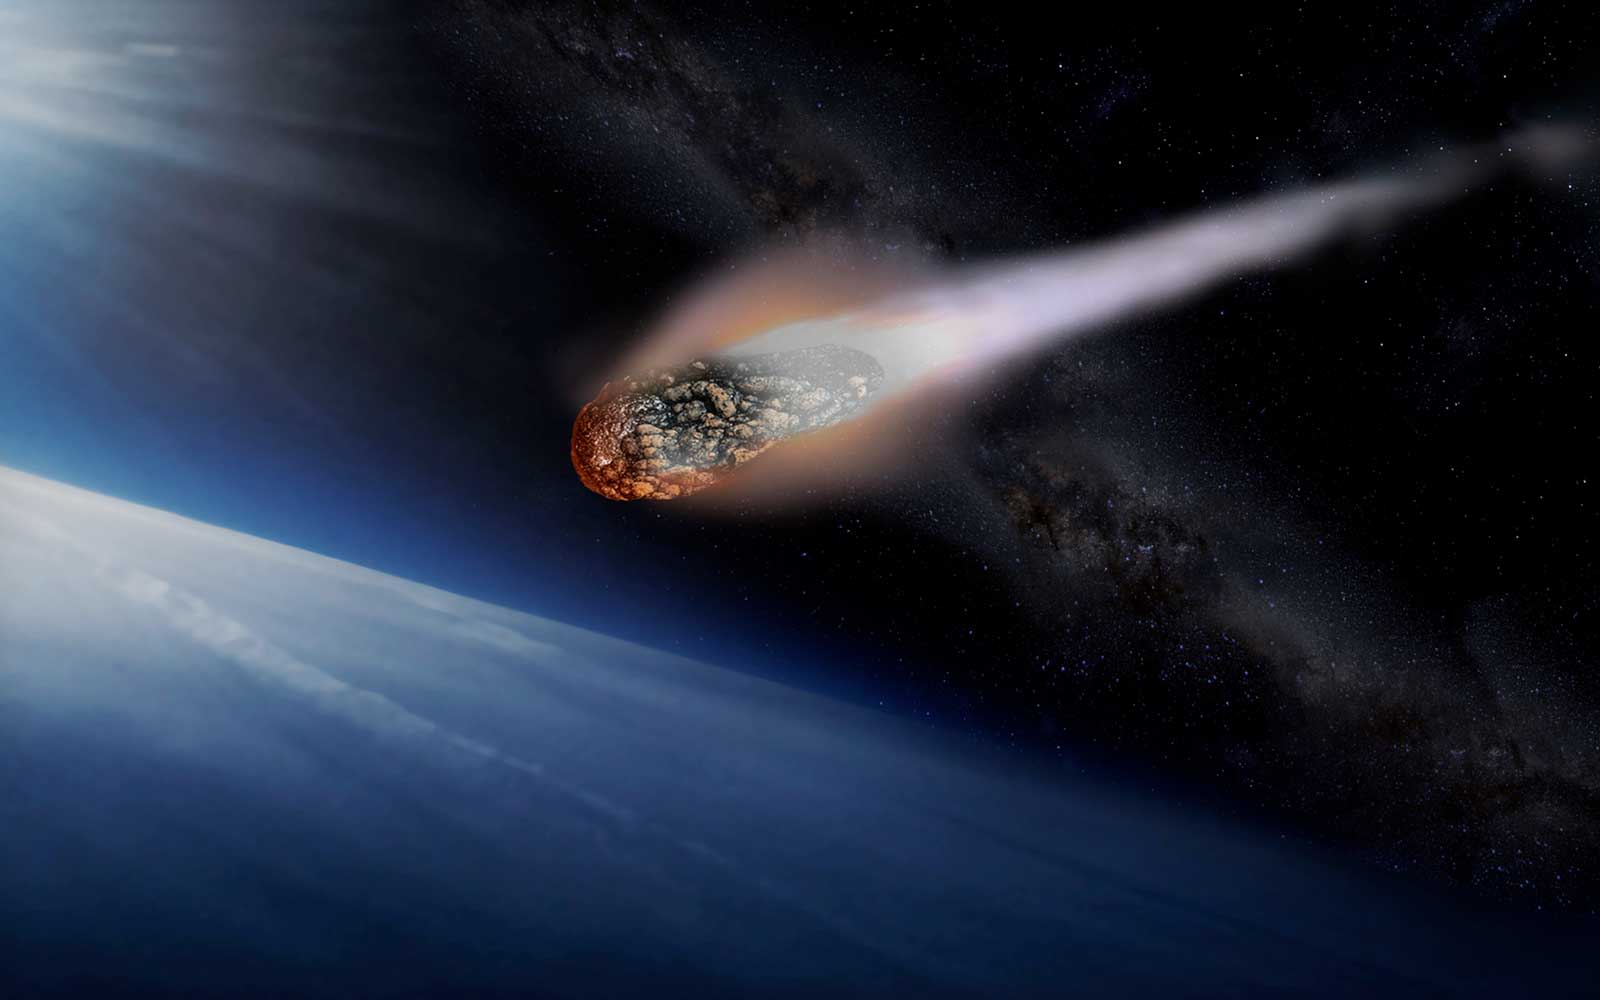 How to See the Giant Asteroid That's Flying by Earth Next Week